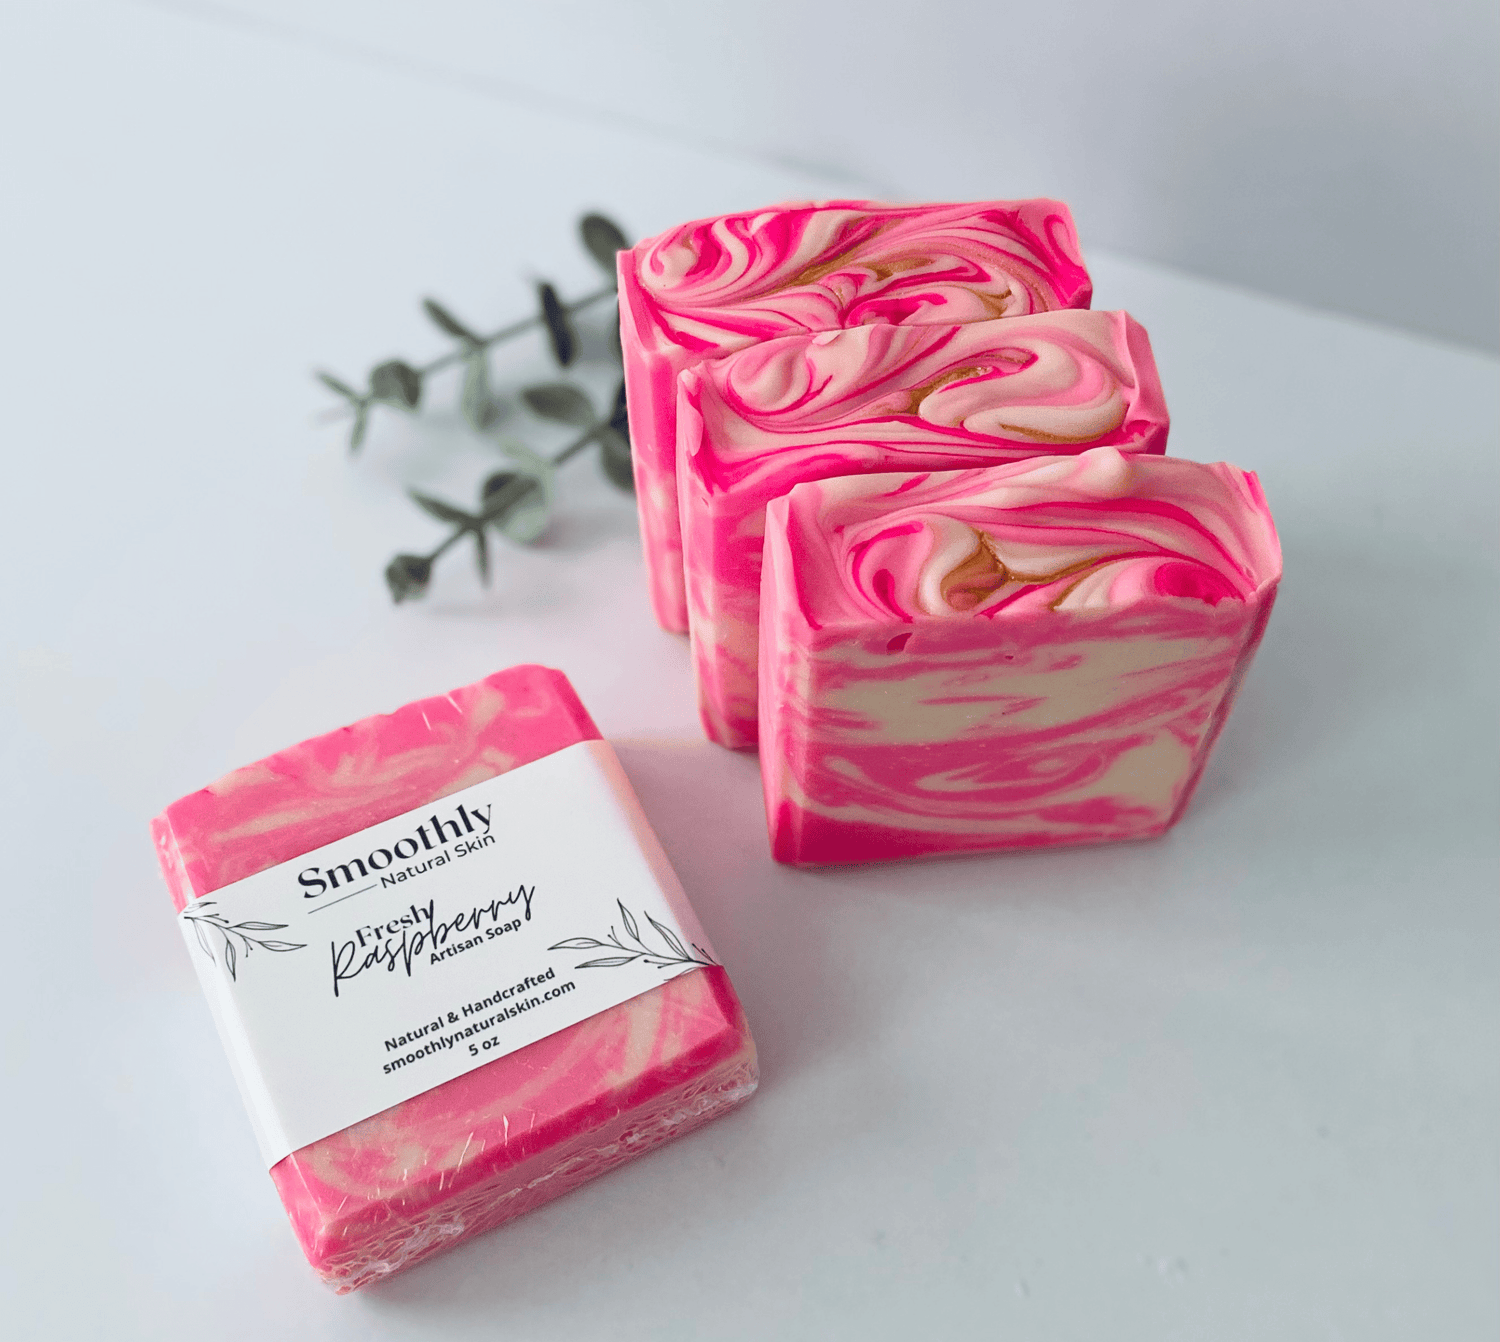 Smells like fresh raspberries. This fragrance is delicious!&nbsp;